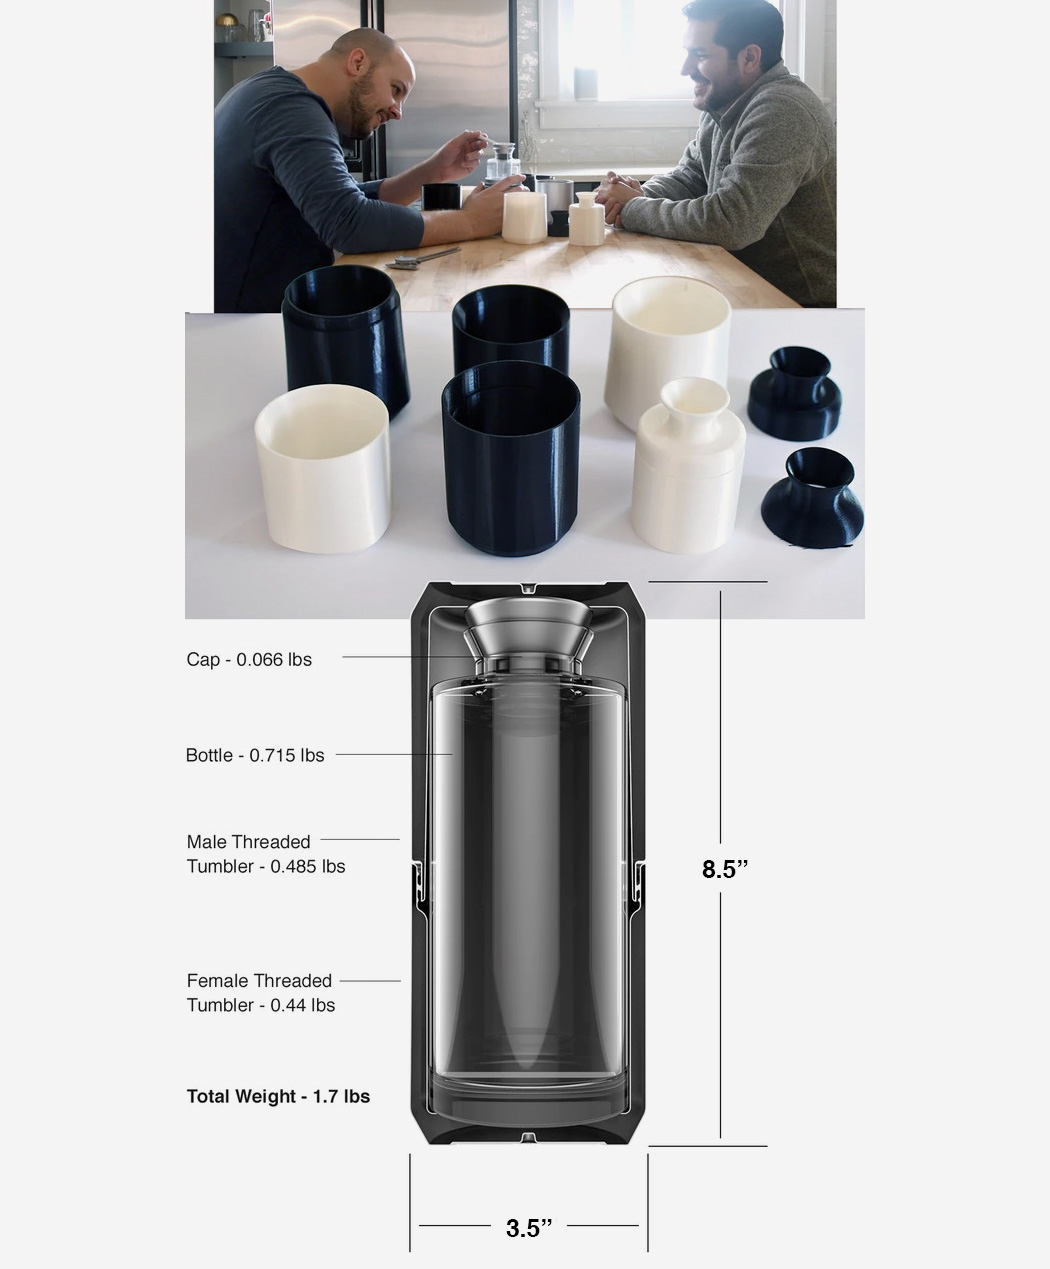 https://www.yankodesign.com/images/design_news/2019/07/someone-invented-this-travel-safe-decanter-to-carry-your-spirits-with-you-on-holidays/travel_decanter12.jpg